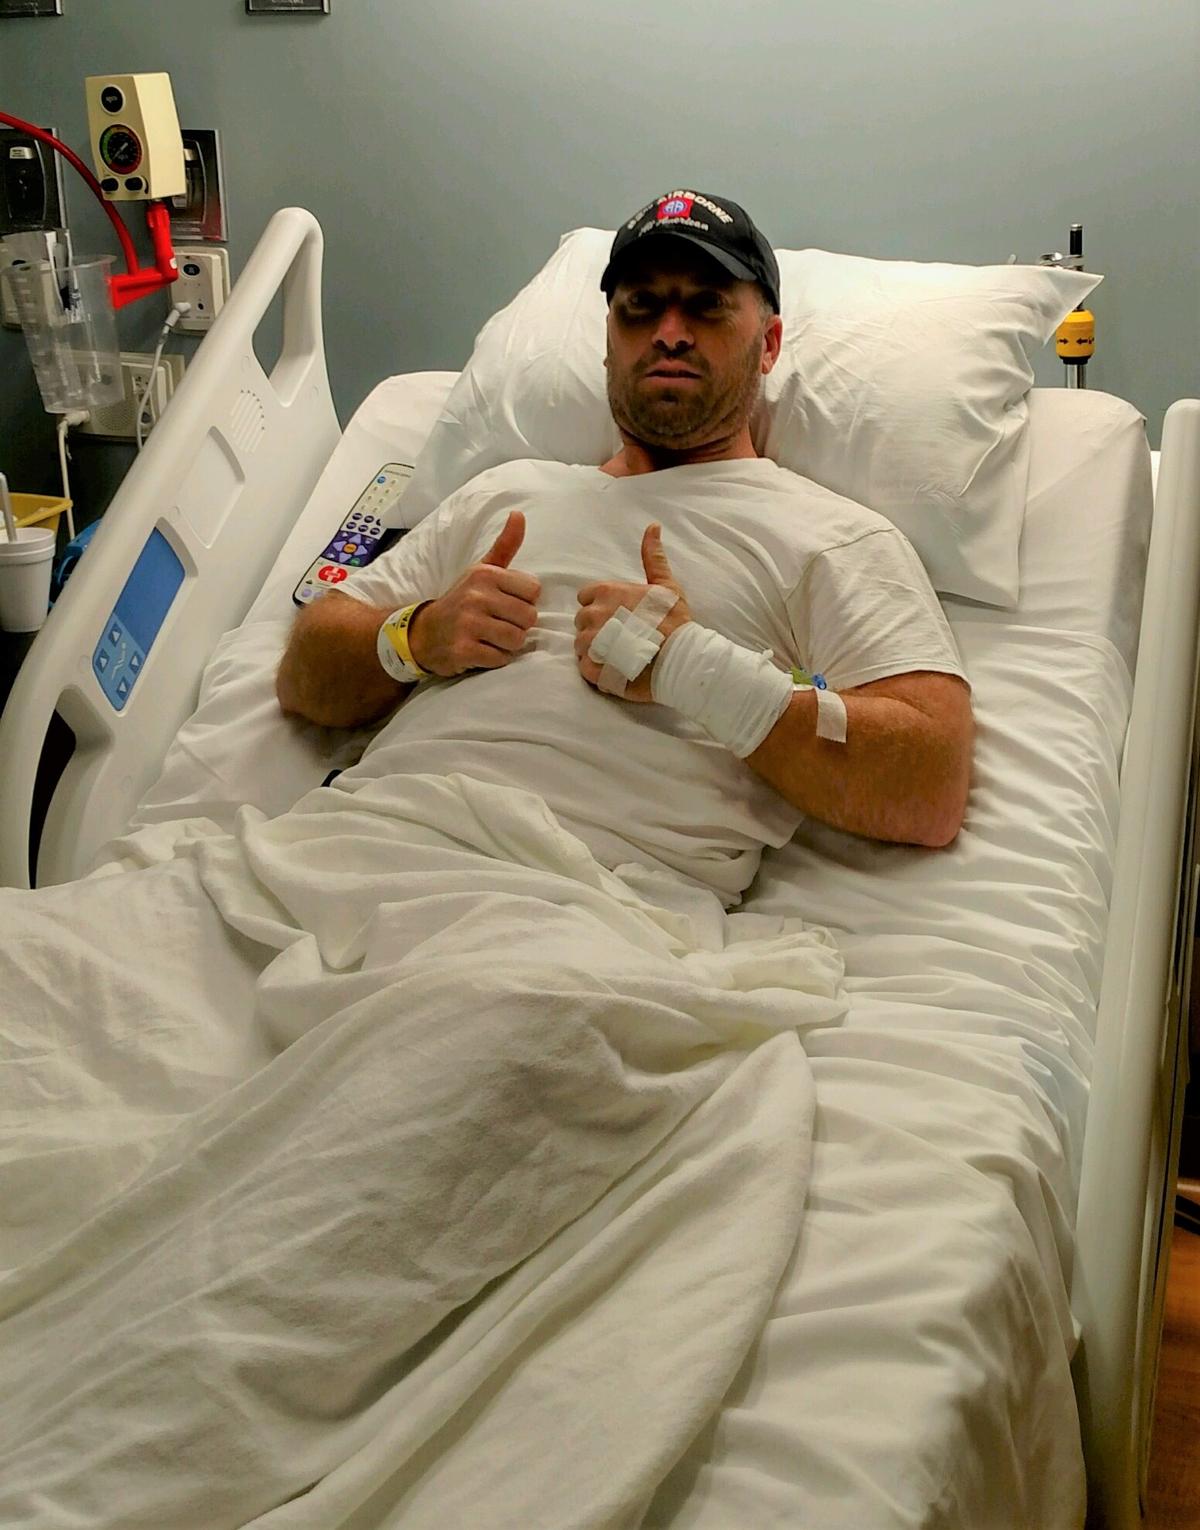 Steven Connors during his recovery. (Courtesy of <a href="https://www.facebook.com/LakelandFD/">Lakeland Fire Department</a>)